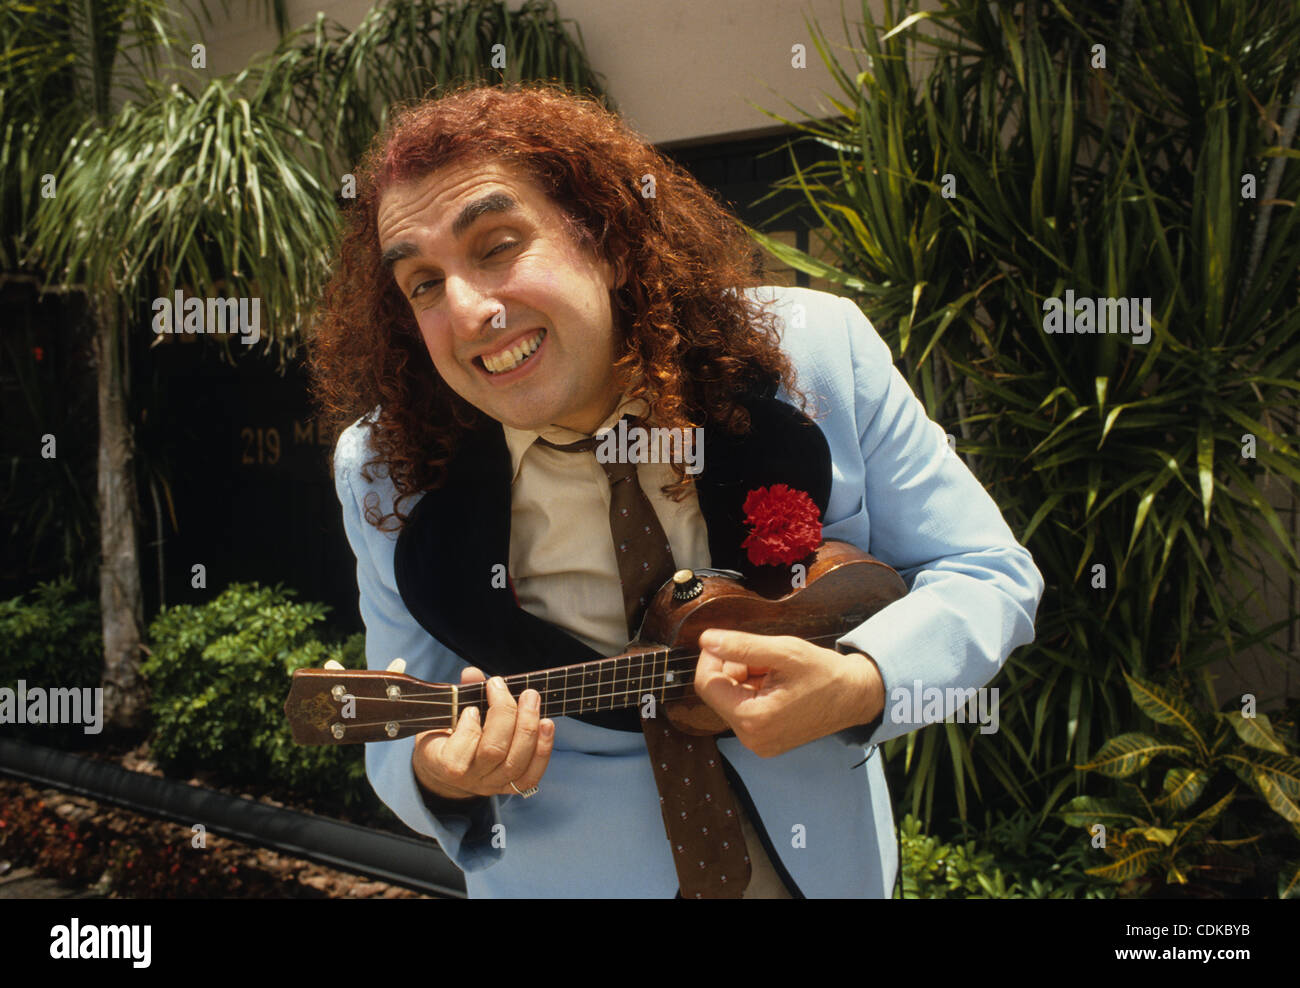 Mar. 15, 2011 - Atlanta, GA, USA - Herbert Khaury (April 12, 1932 â€“ November 30, 1996), better known by the stage name Tiny Tim, was an American singer and ukulele player. He was most famous for his rendition of ''Tiptoe Through the Tulips'' sung in a distinctive high falsetto/vibrato voice (thoug Stock Photo